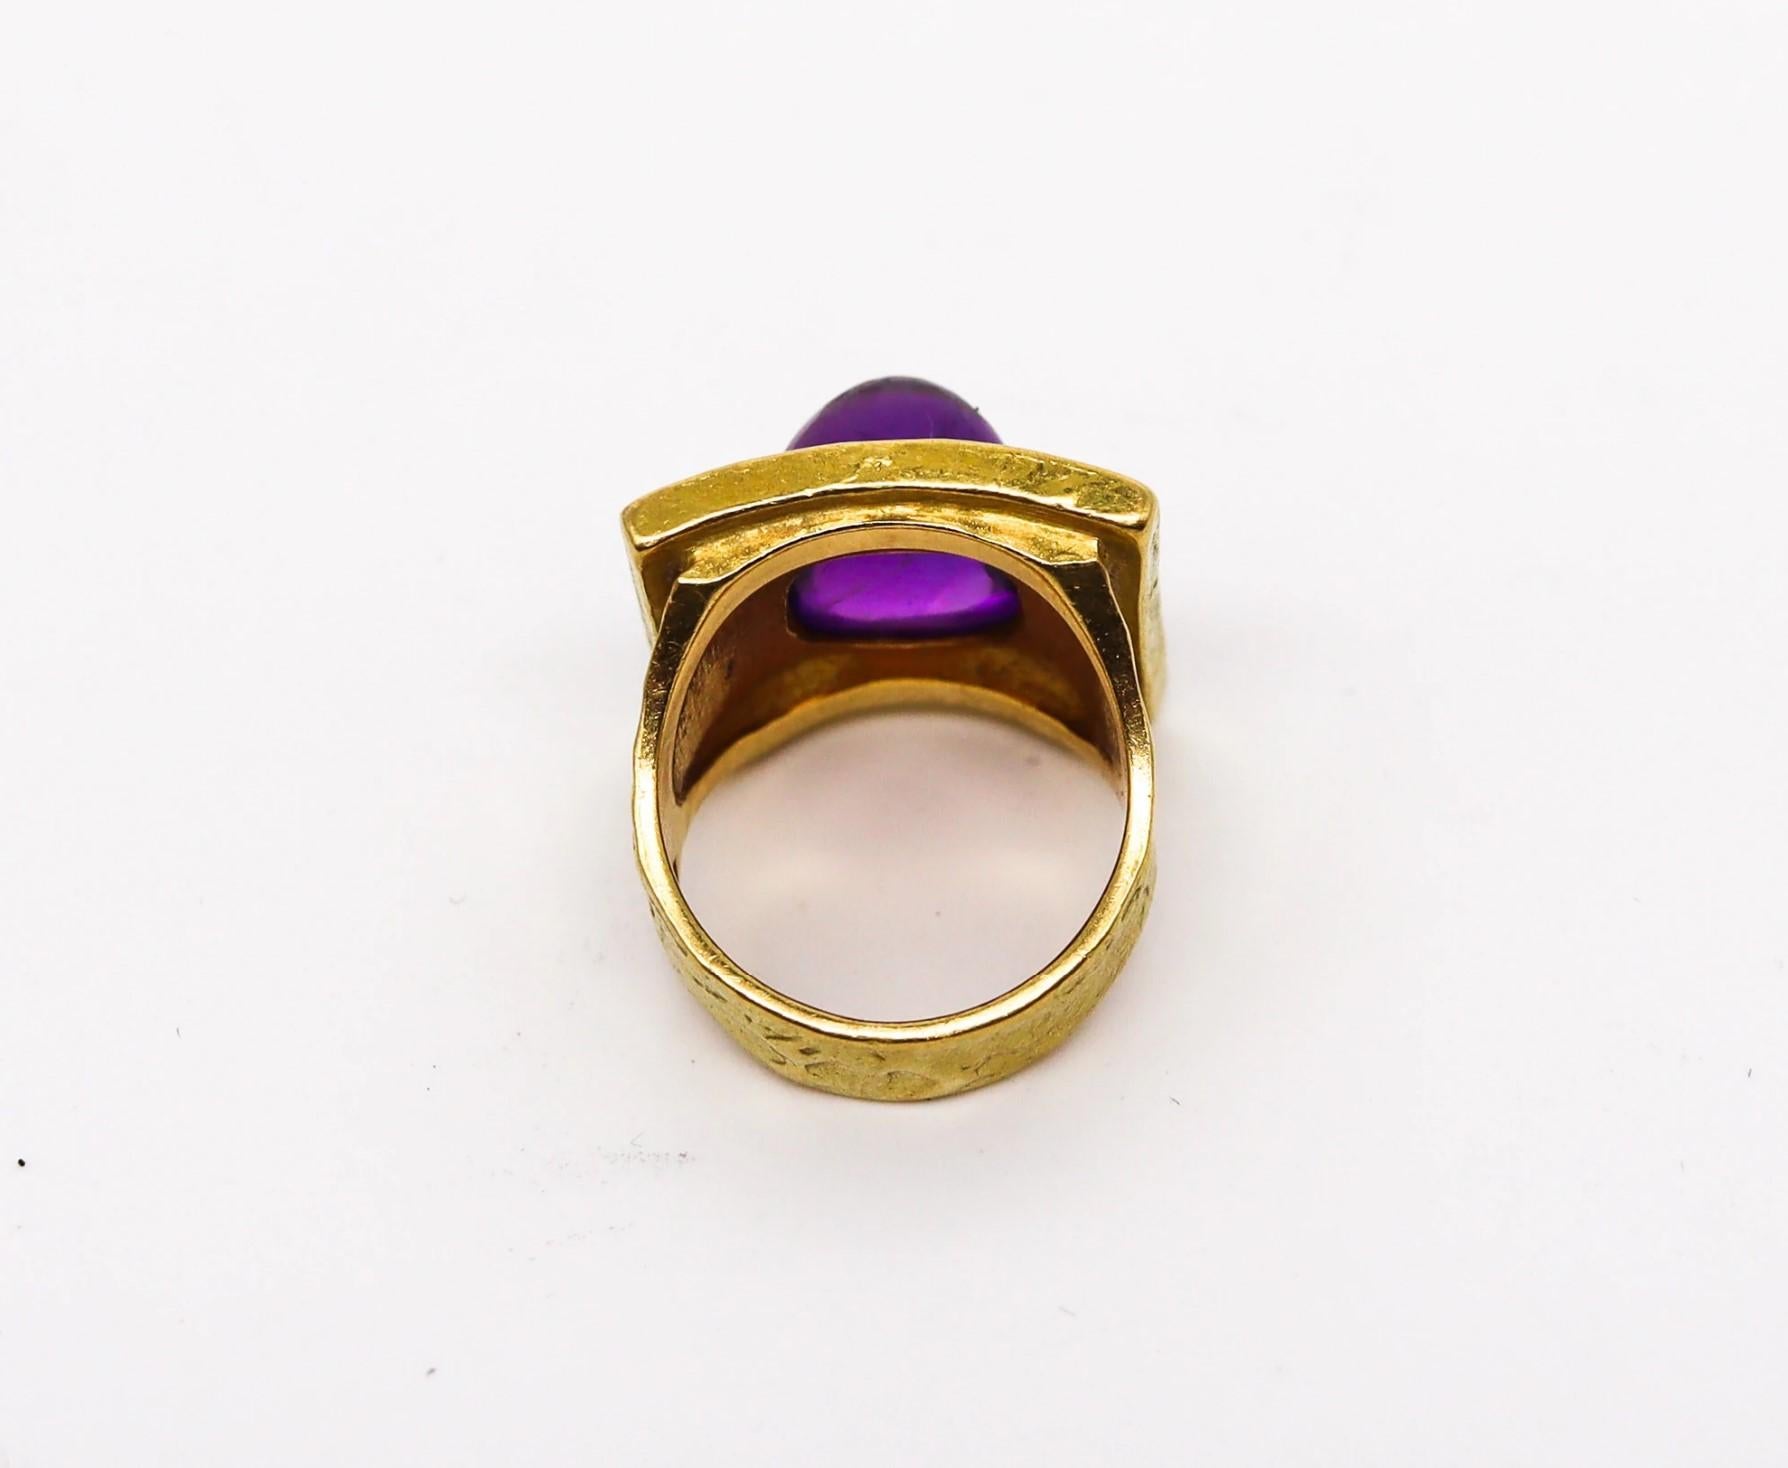 Modernist Ed Wiener 1970 Sculptural Cocktail Ring in 18Kt Yellow Gold with Vivid Amethyst